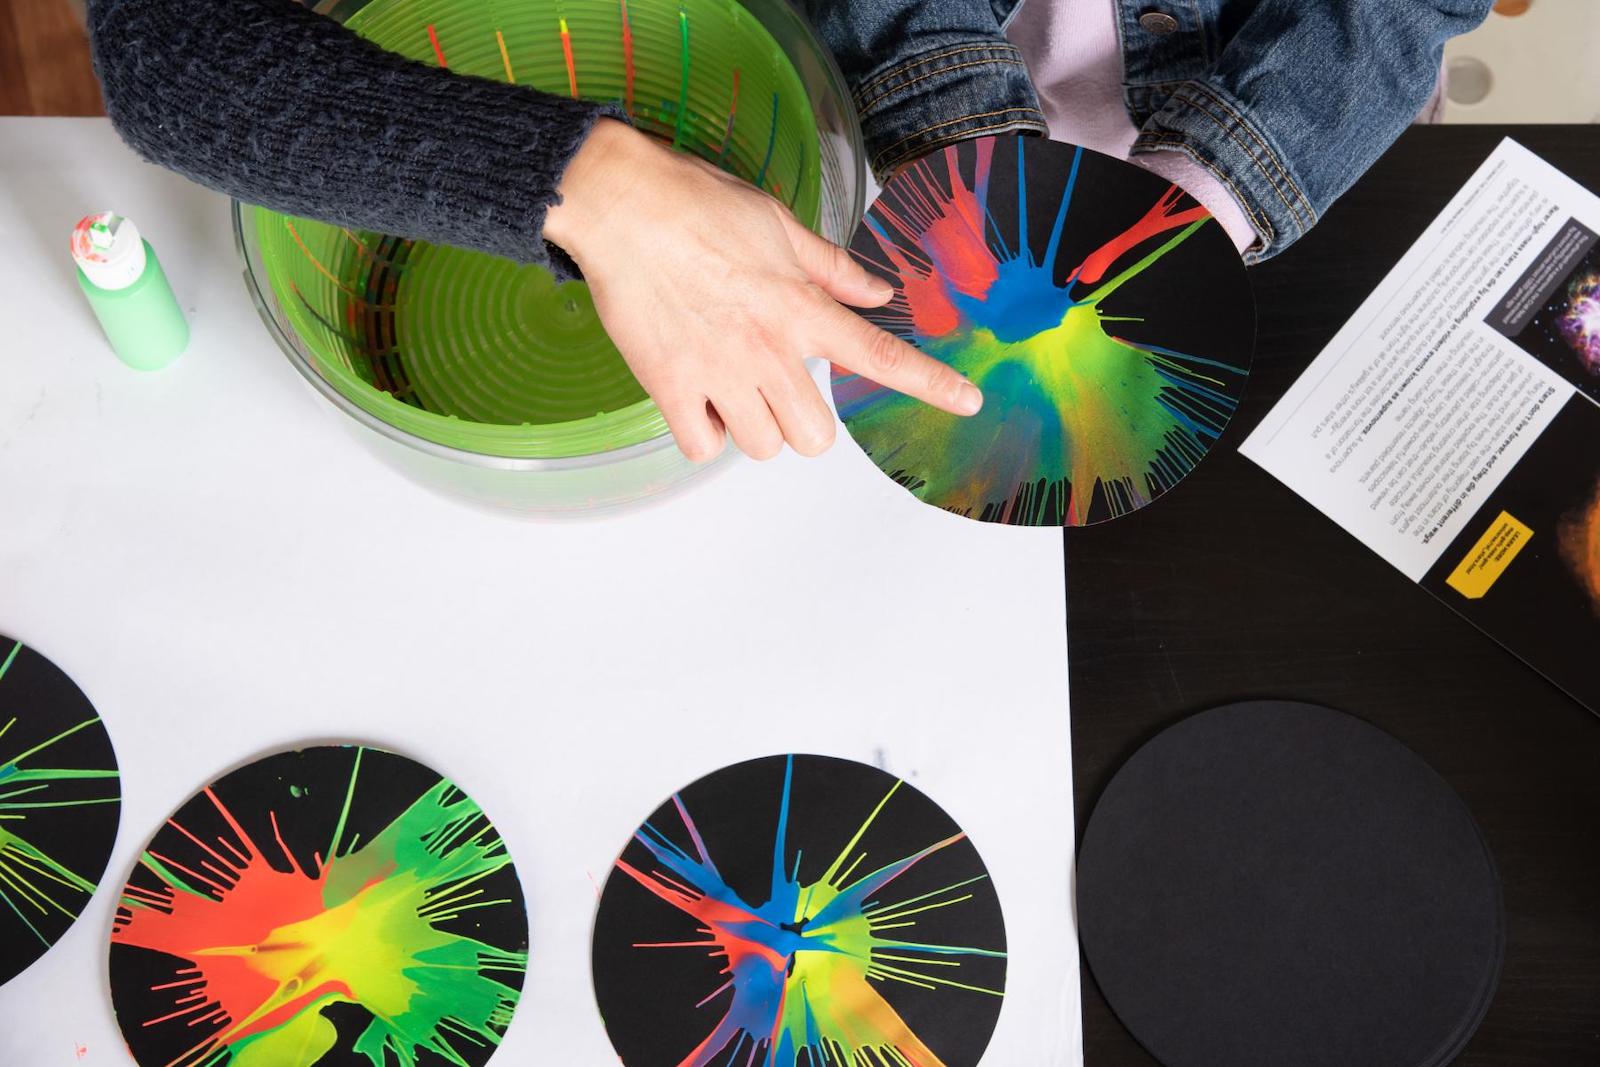 Spin Art: Keeping the Wheels of Creativity Turning